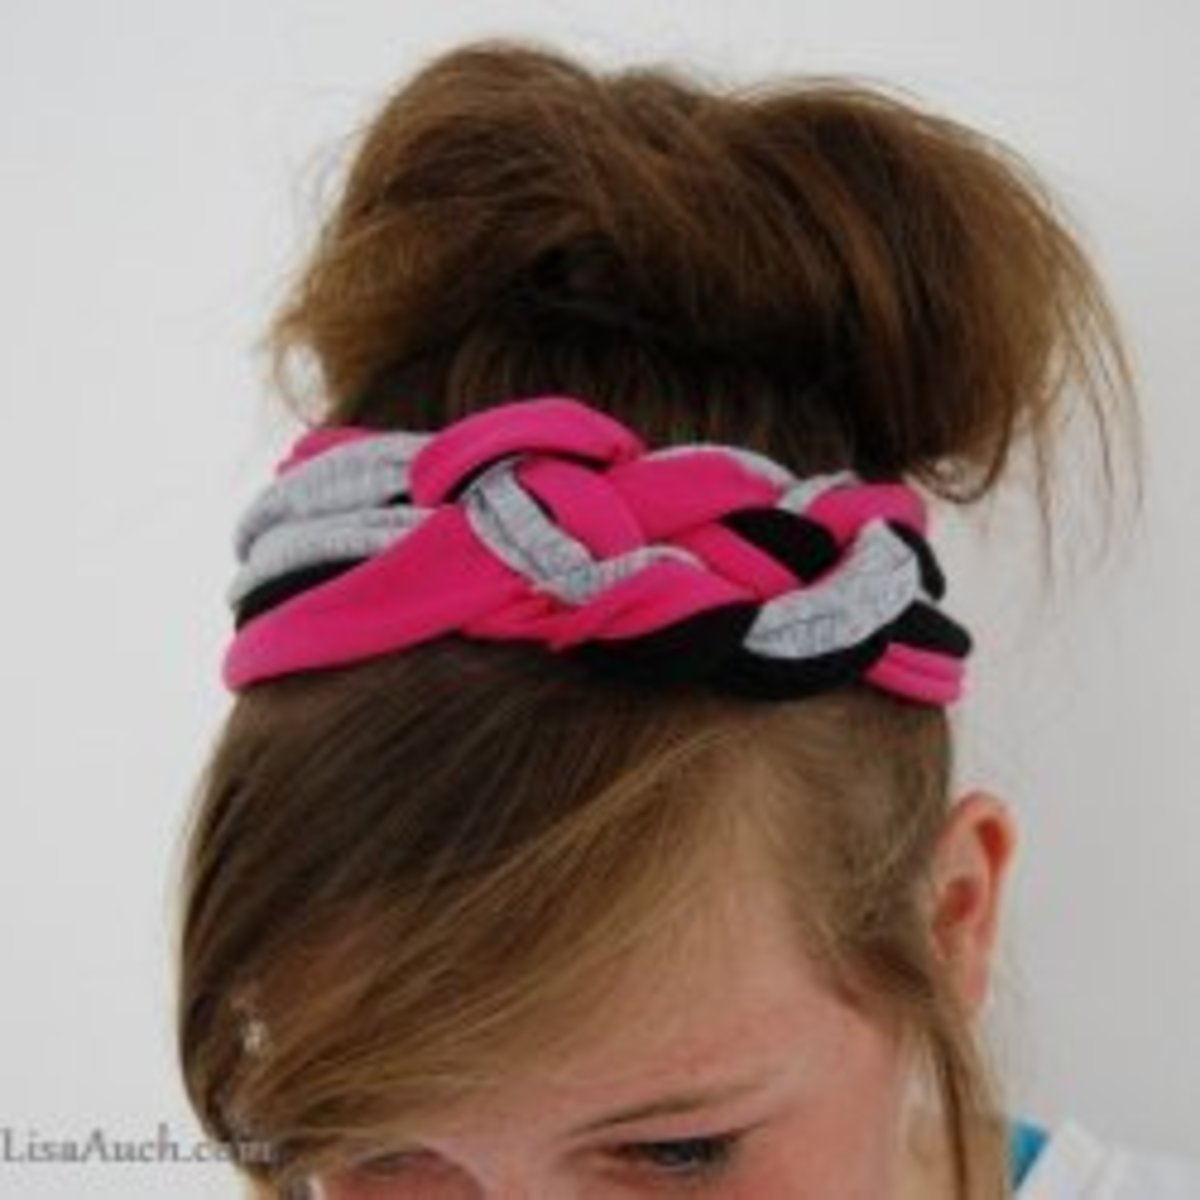 DIY: Make Your Own Fabulous Headbands Using Old T-shirts